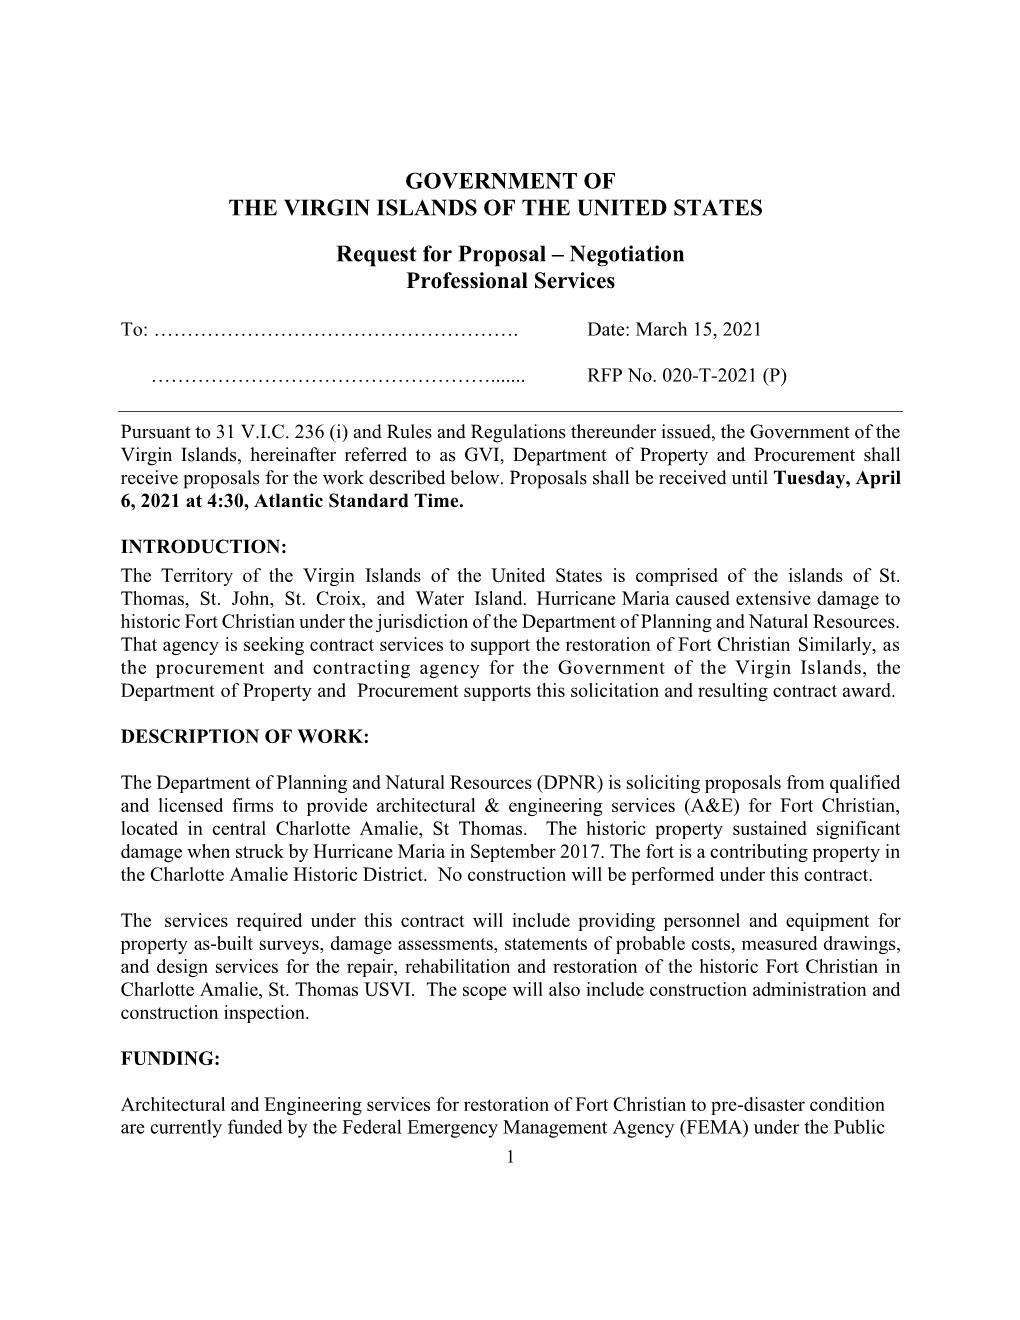 GOVERNMENT of the VIRGIN ISLANDS of the UNITED STATES Request for Proposal – Negotiation Professional Services